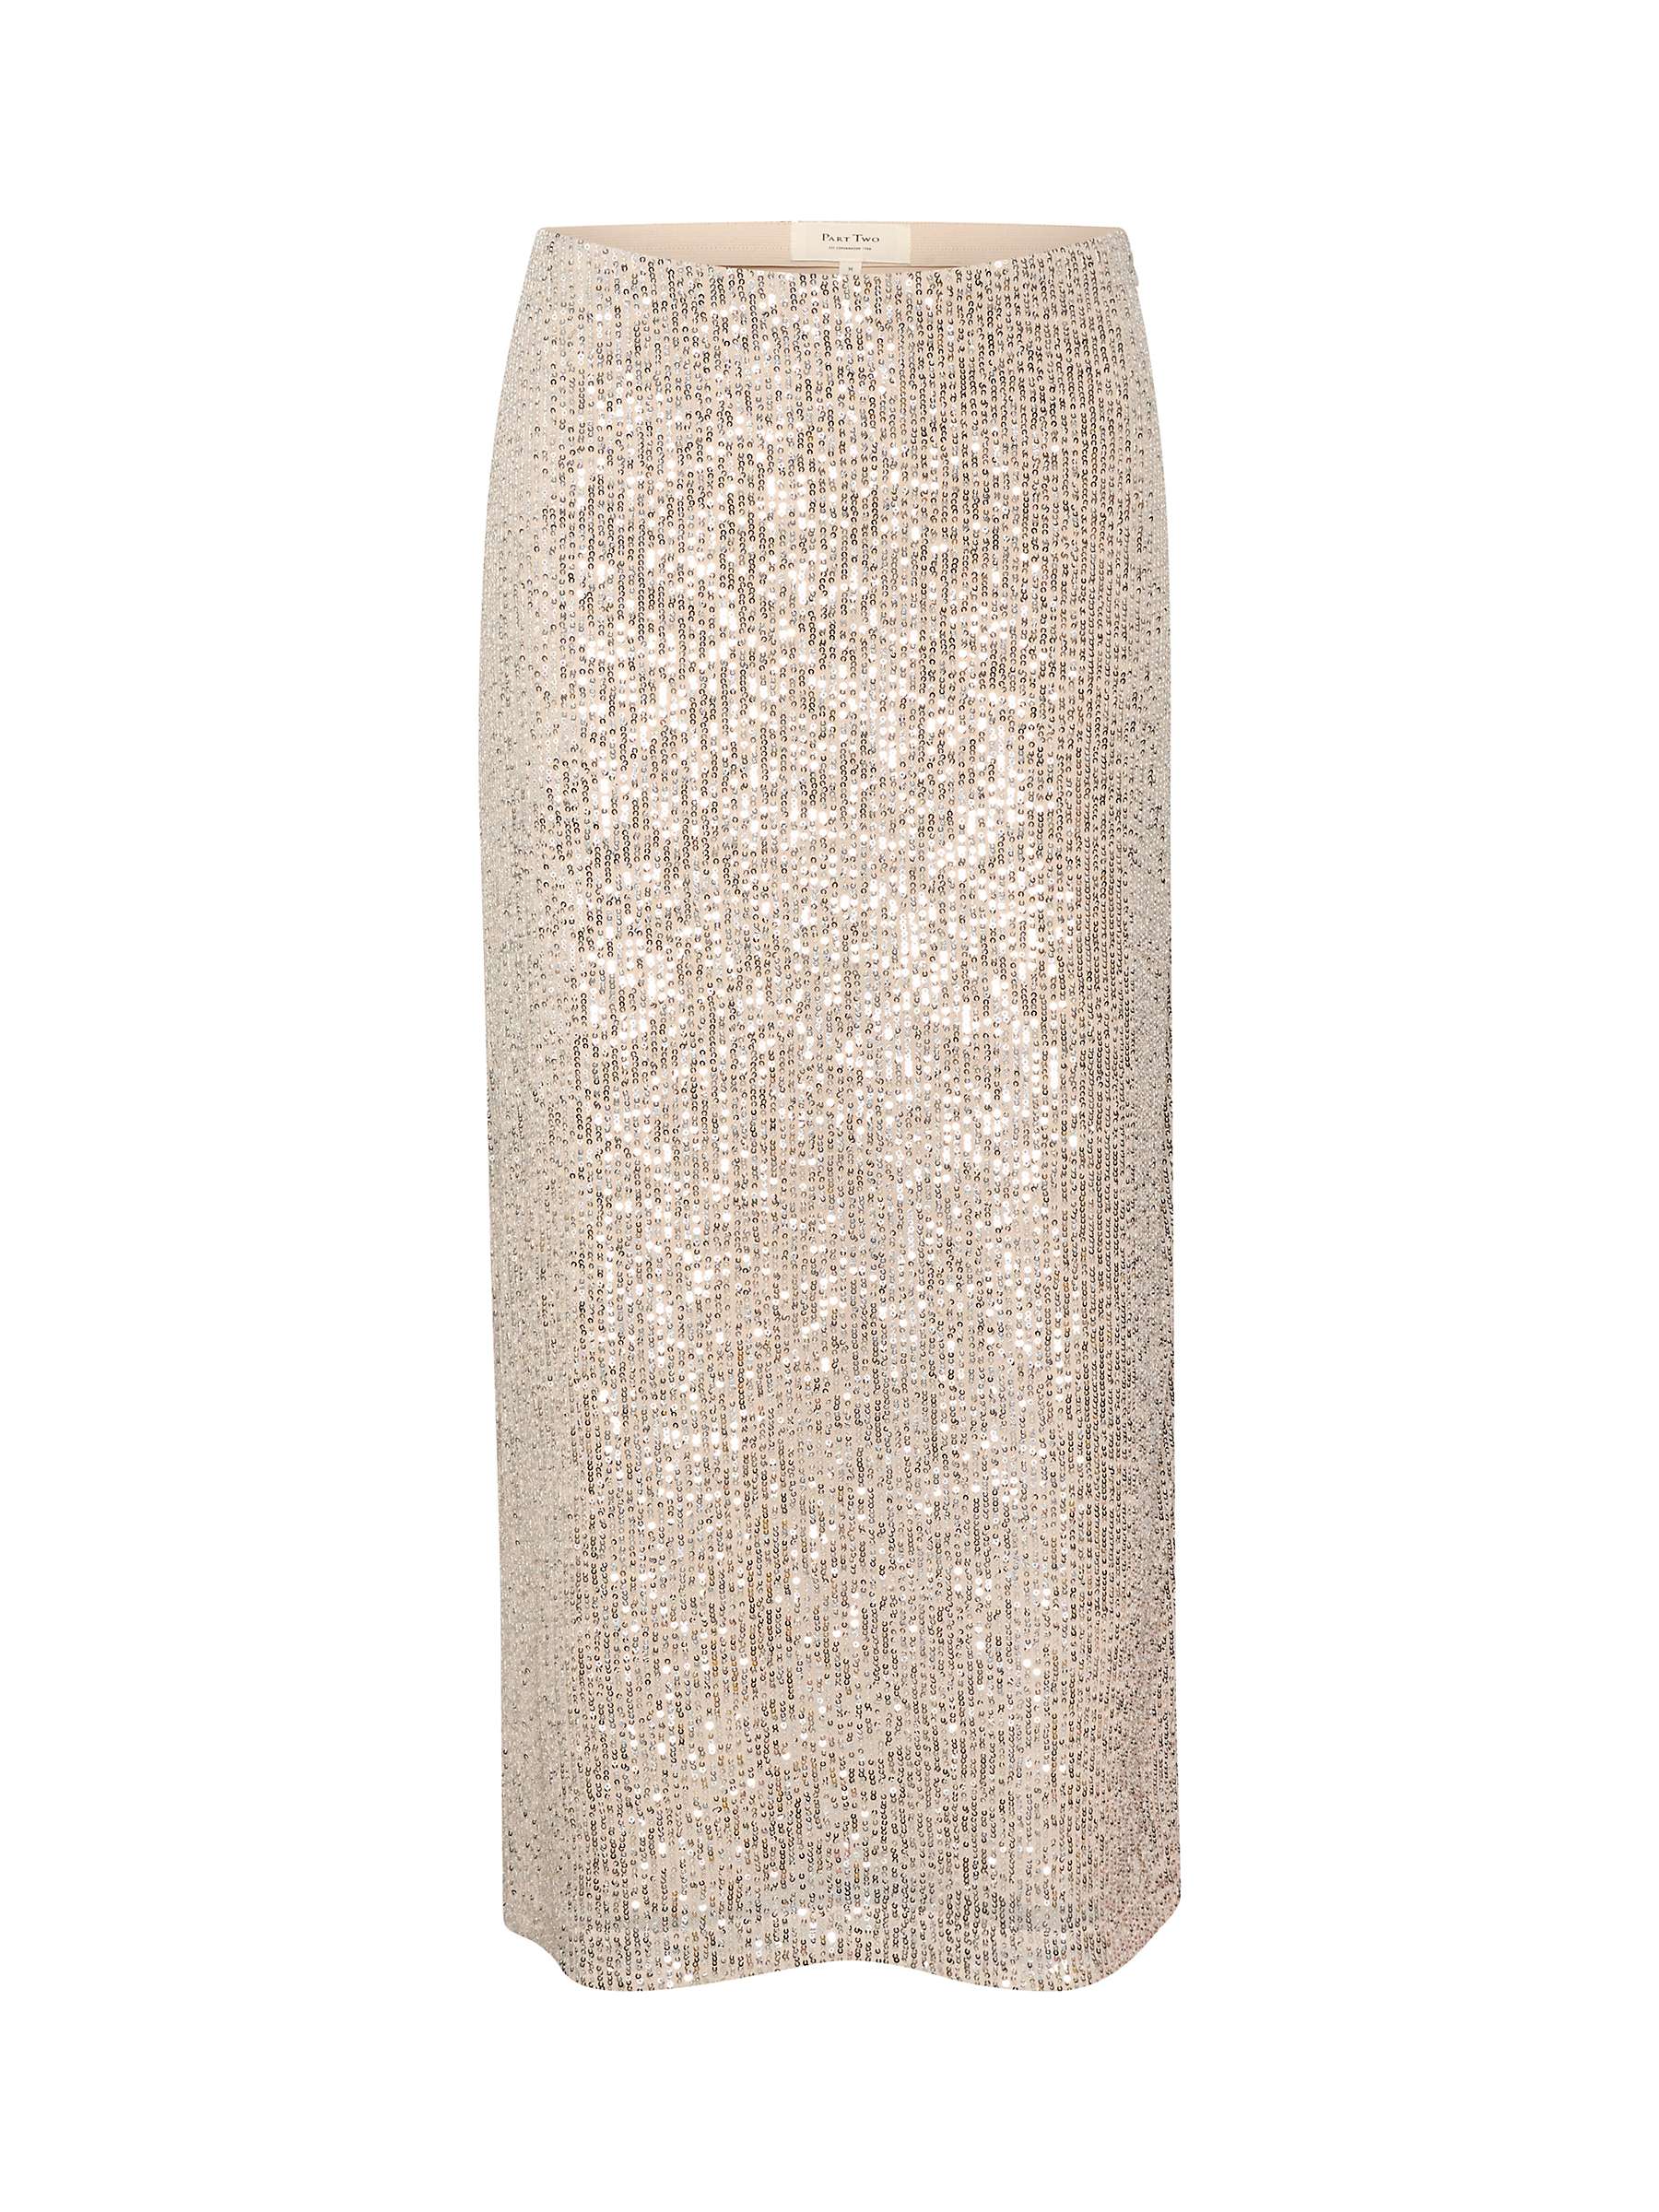 Buy Part Two Teffani Sequin Maxi Skirt, Silver Online at johnlewis.com